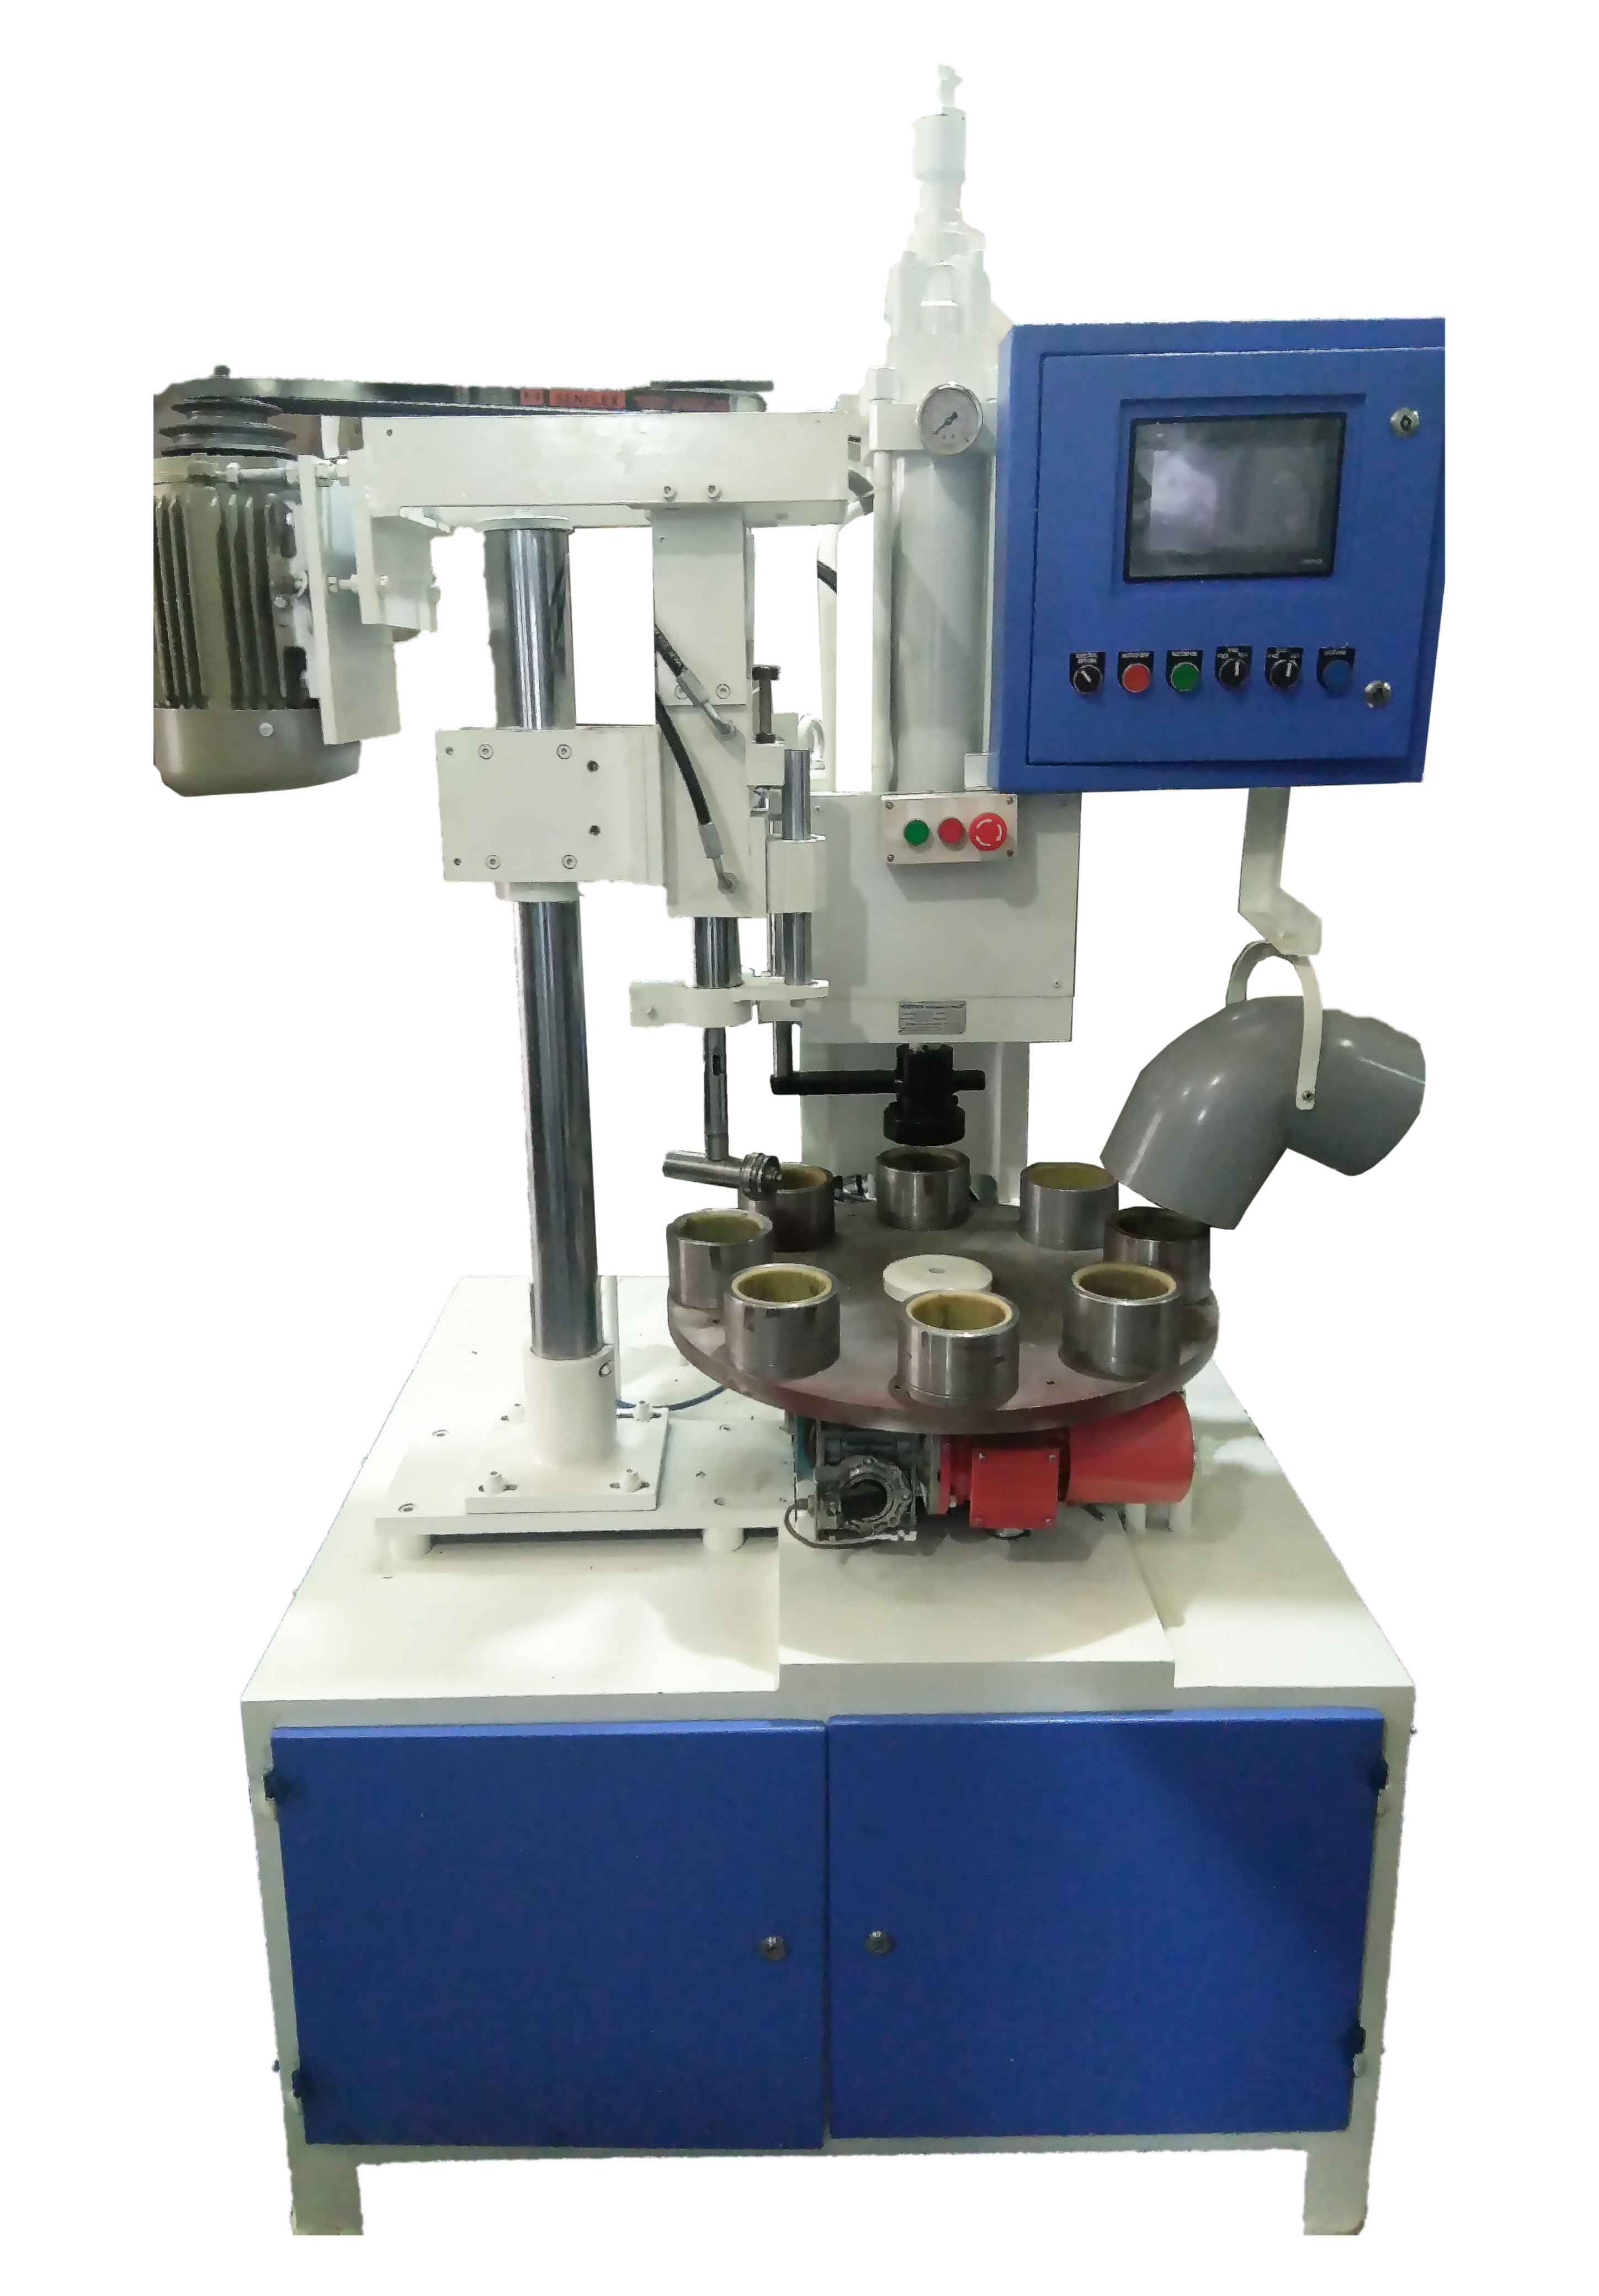 ritters 3 Station Working Press for Packaging Can Knurling With Auto Ejection and Chamfer Operation